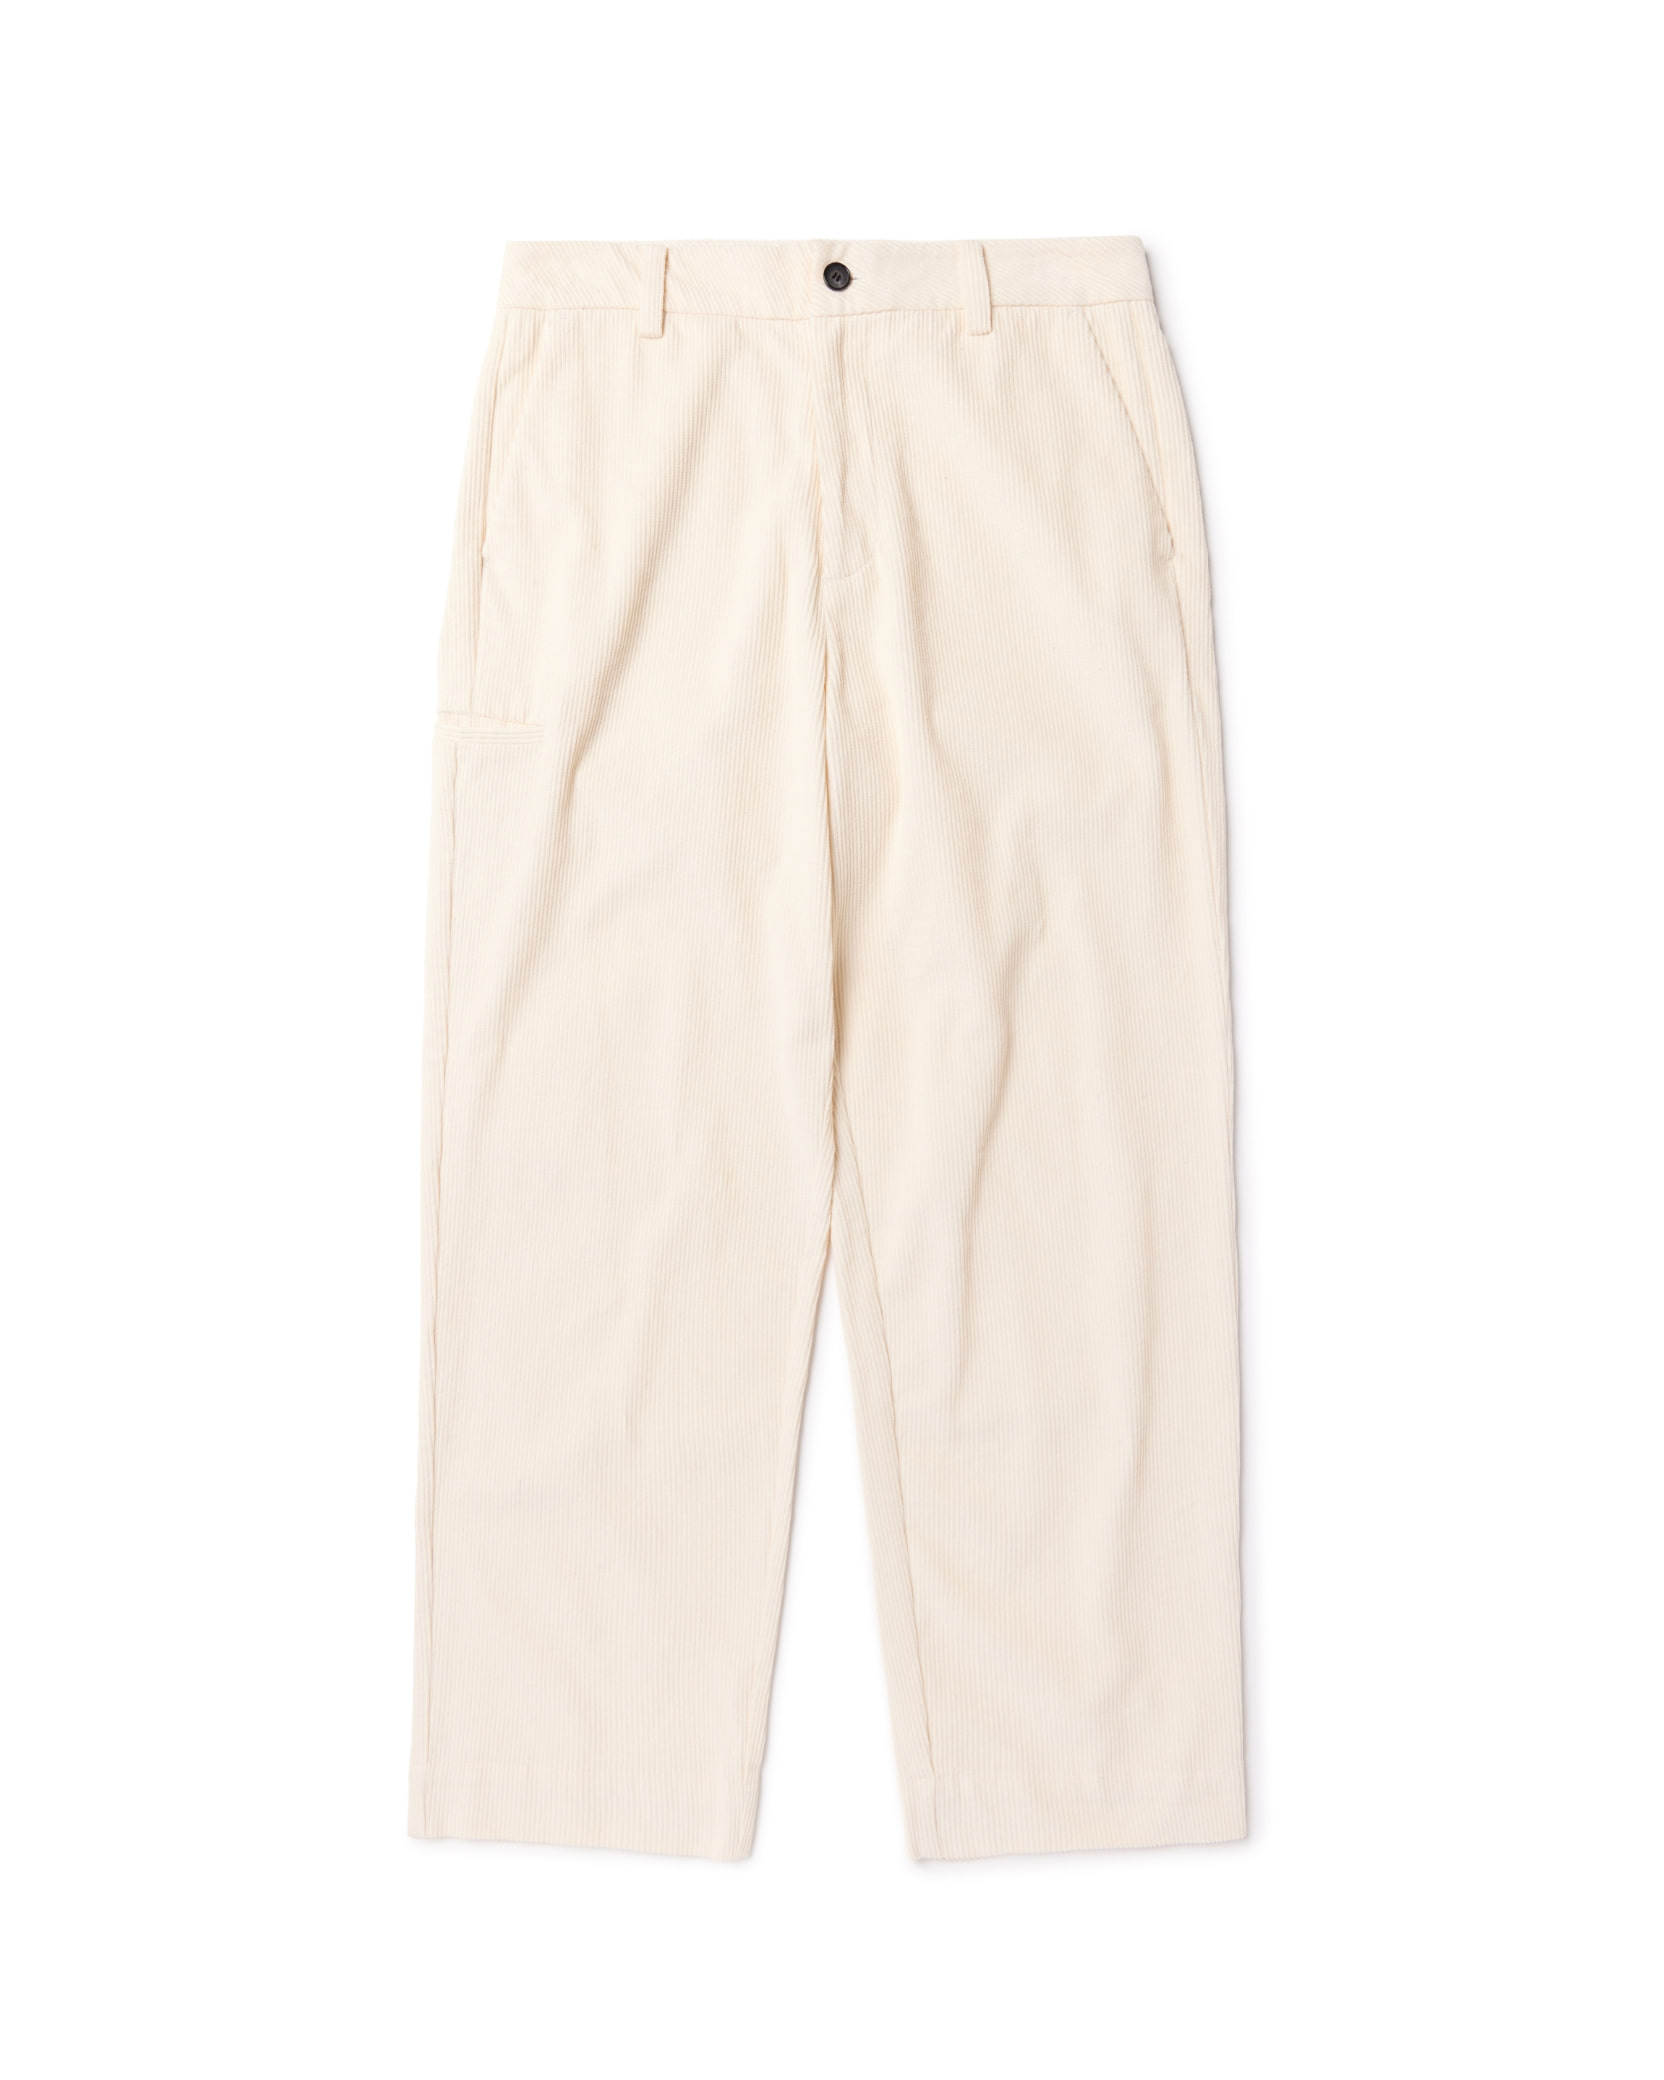 CODUROY RELAX FIT TROUSERS - IVORY